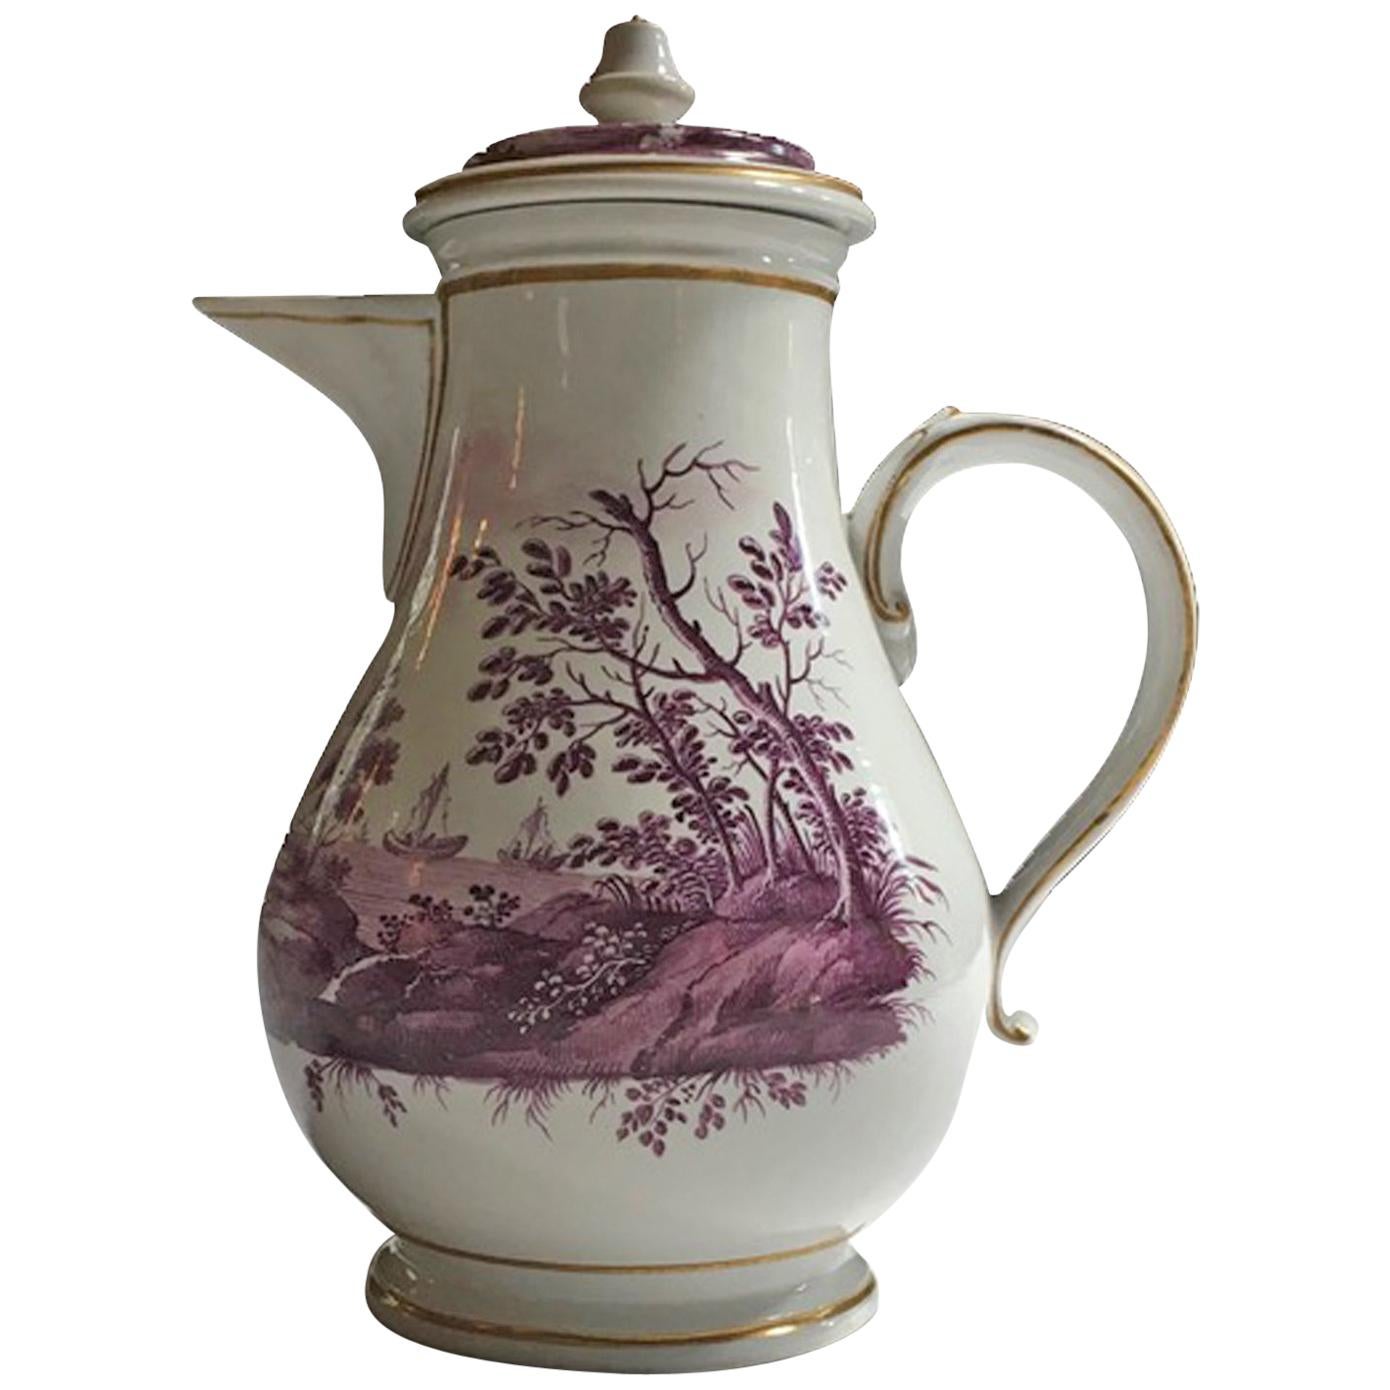 Italy Richard Ginori Mid-18th Century Porcelain Coffee Pot Landscapes in Purple